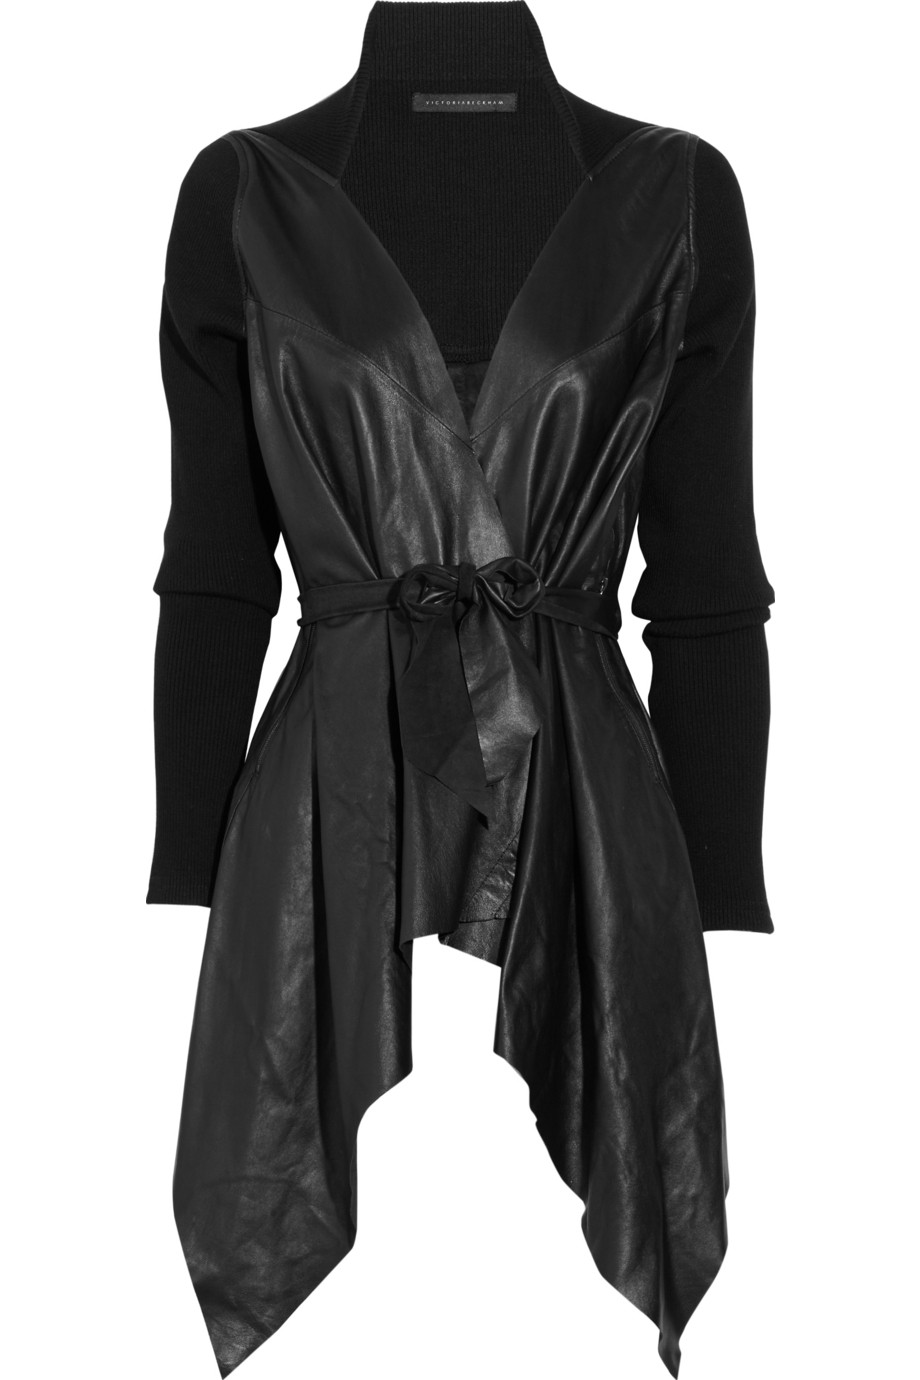 Victoria Beckham Draped Leather Jacket in Black | Lyst